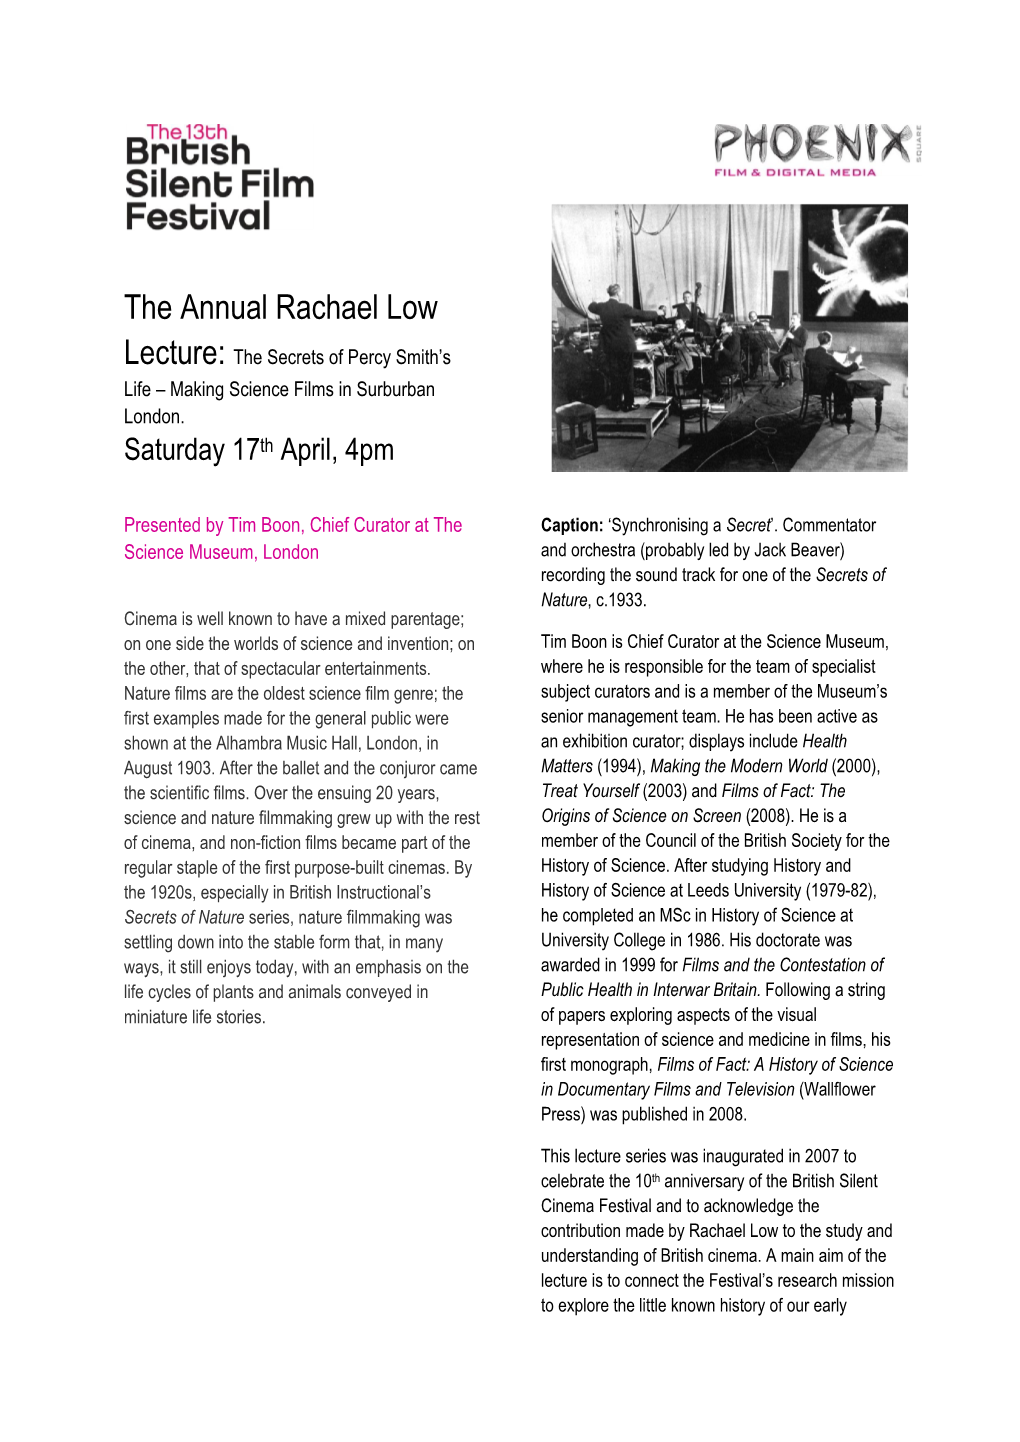 The Annual Rachael Low Lecture: the Secrets of Percy Smith’S Life – Making Science Films in Surburban London